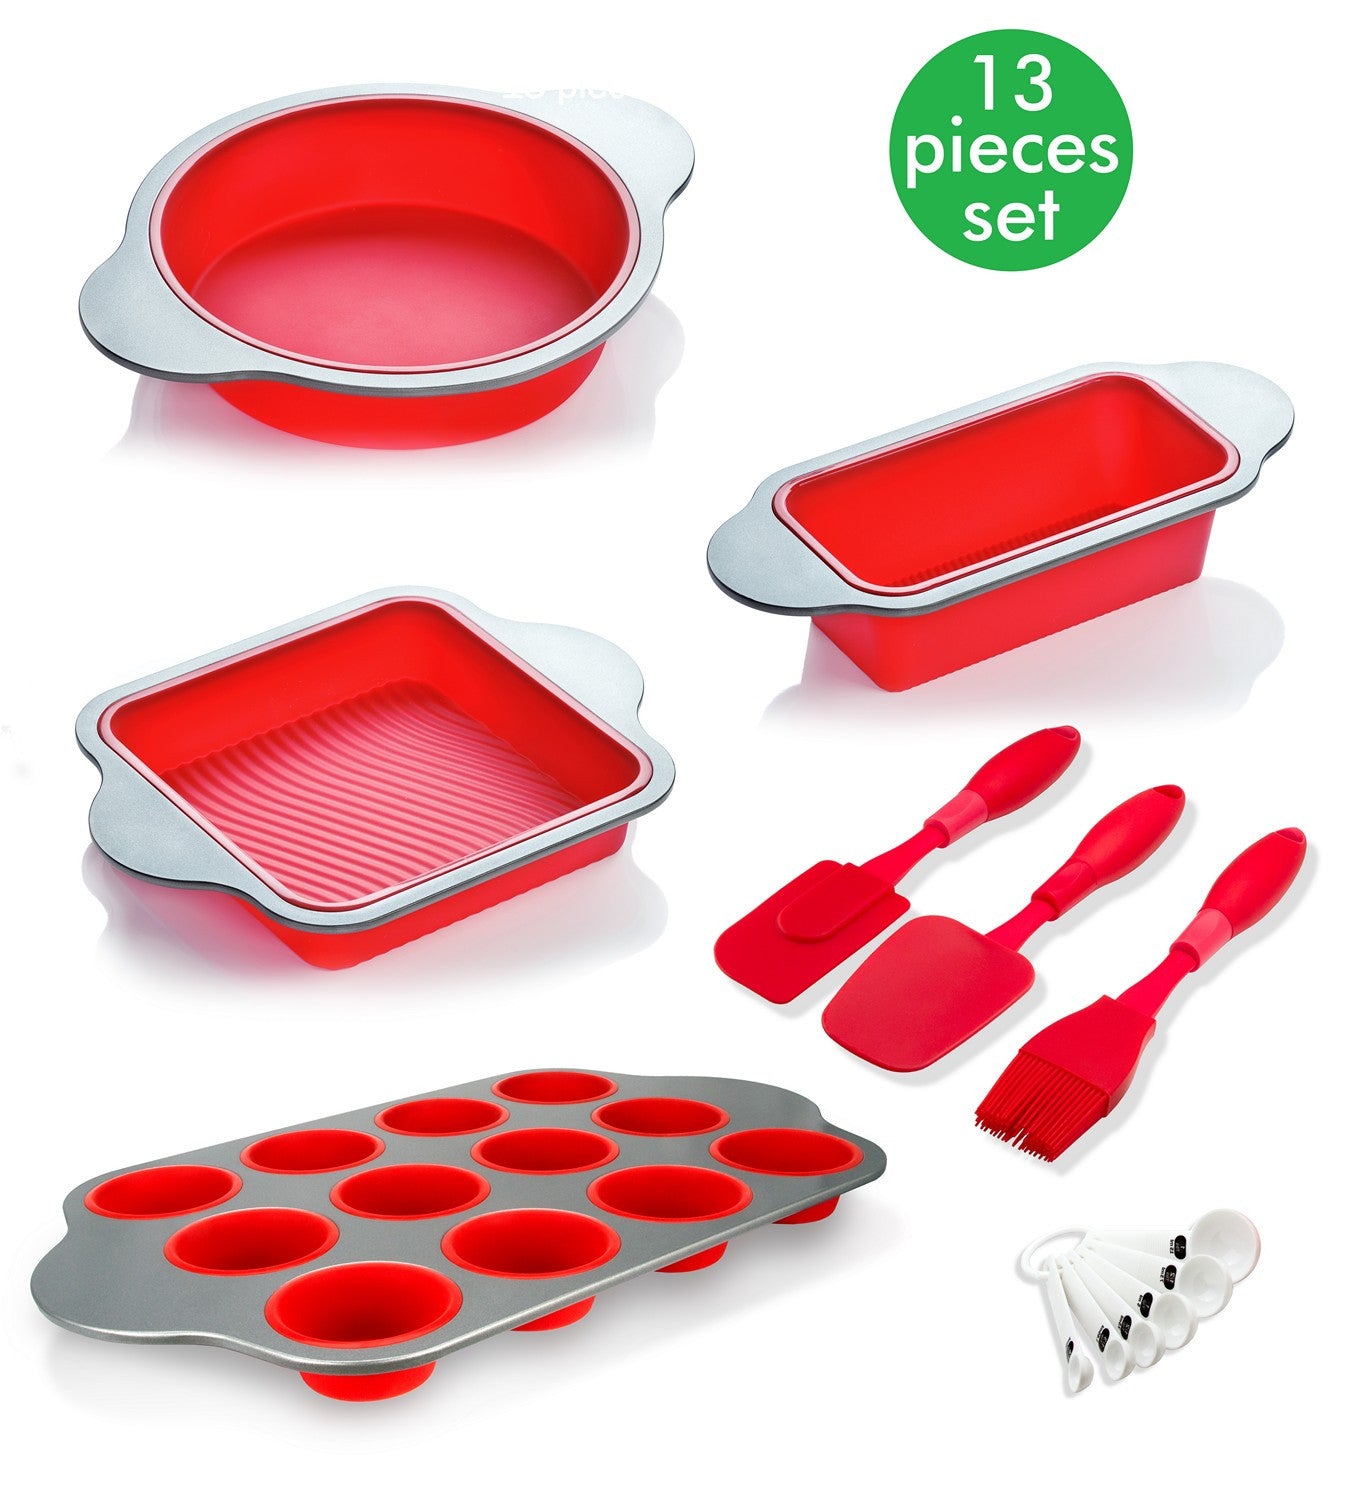 13-Piece Non-Stick Silicone Bakeware Set with Cake Pan, Brownie